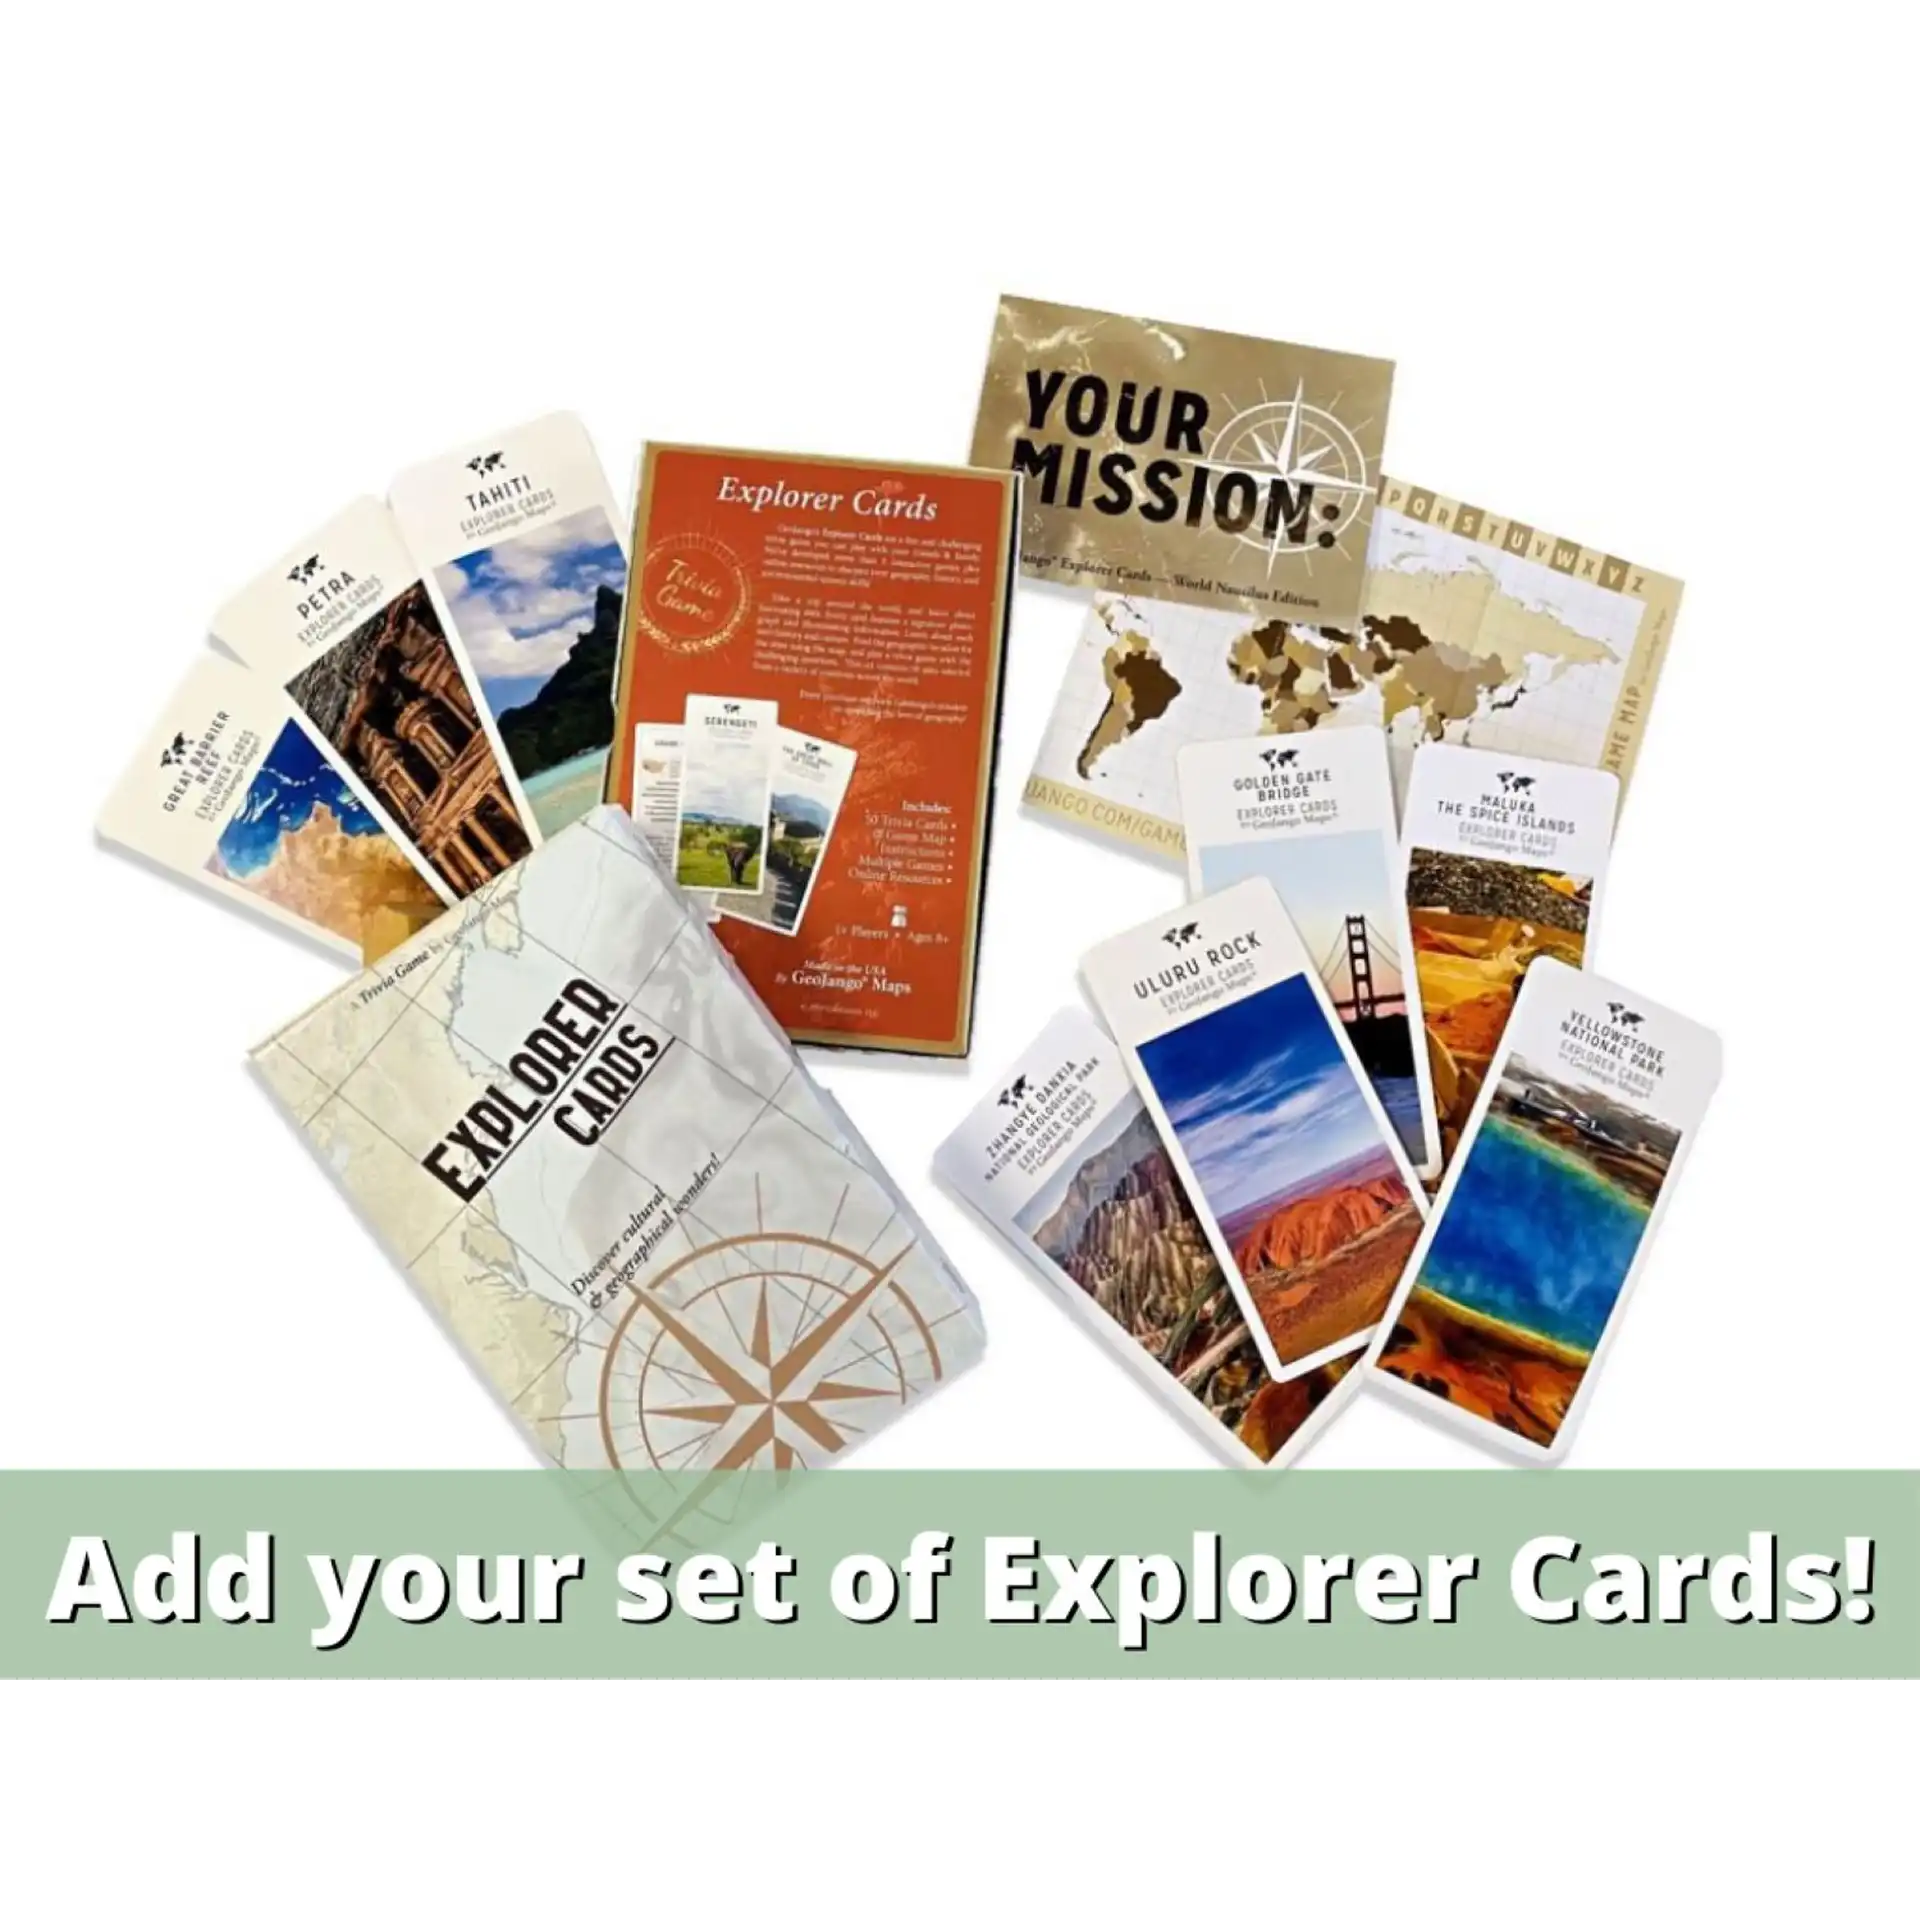 Learn even more about the world with our Explorer Card game set for exploring world wonders found on your world map